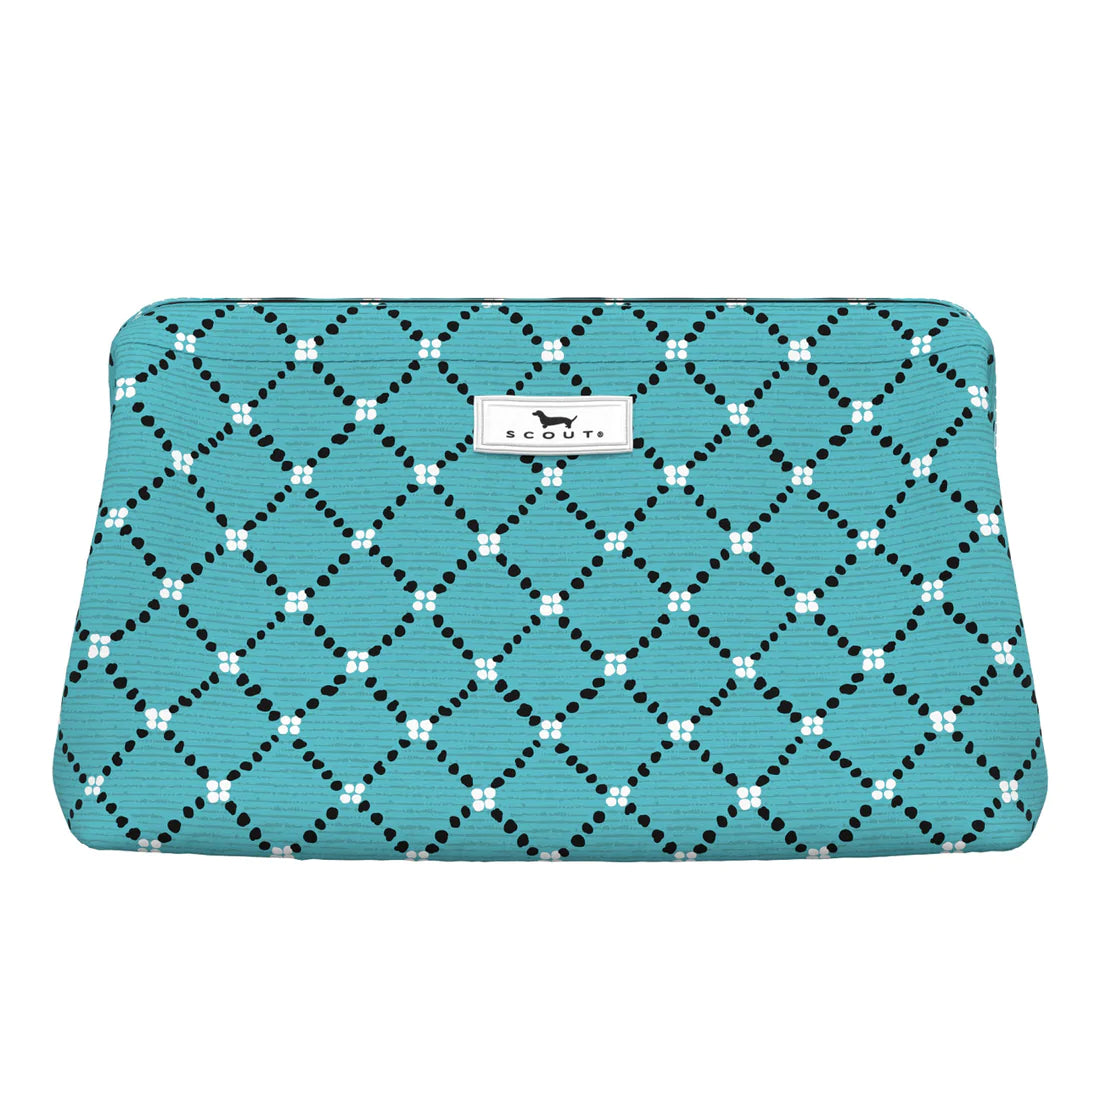 Scout Big Mouth Toiletry Bag - Stitch Please